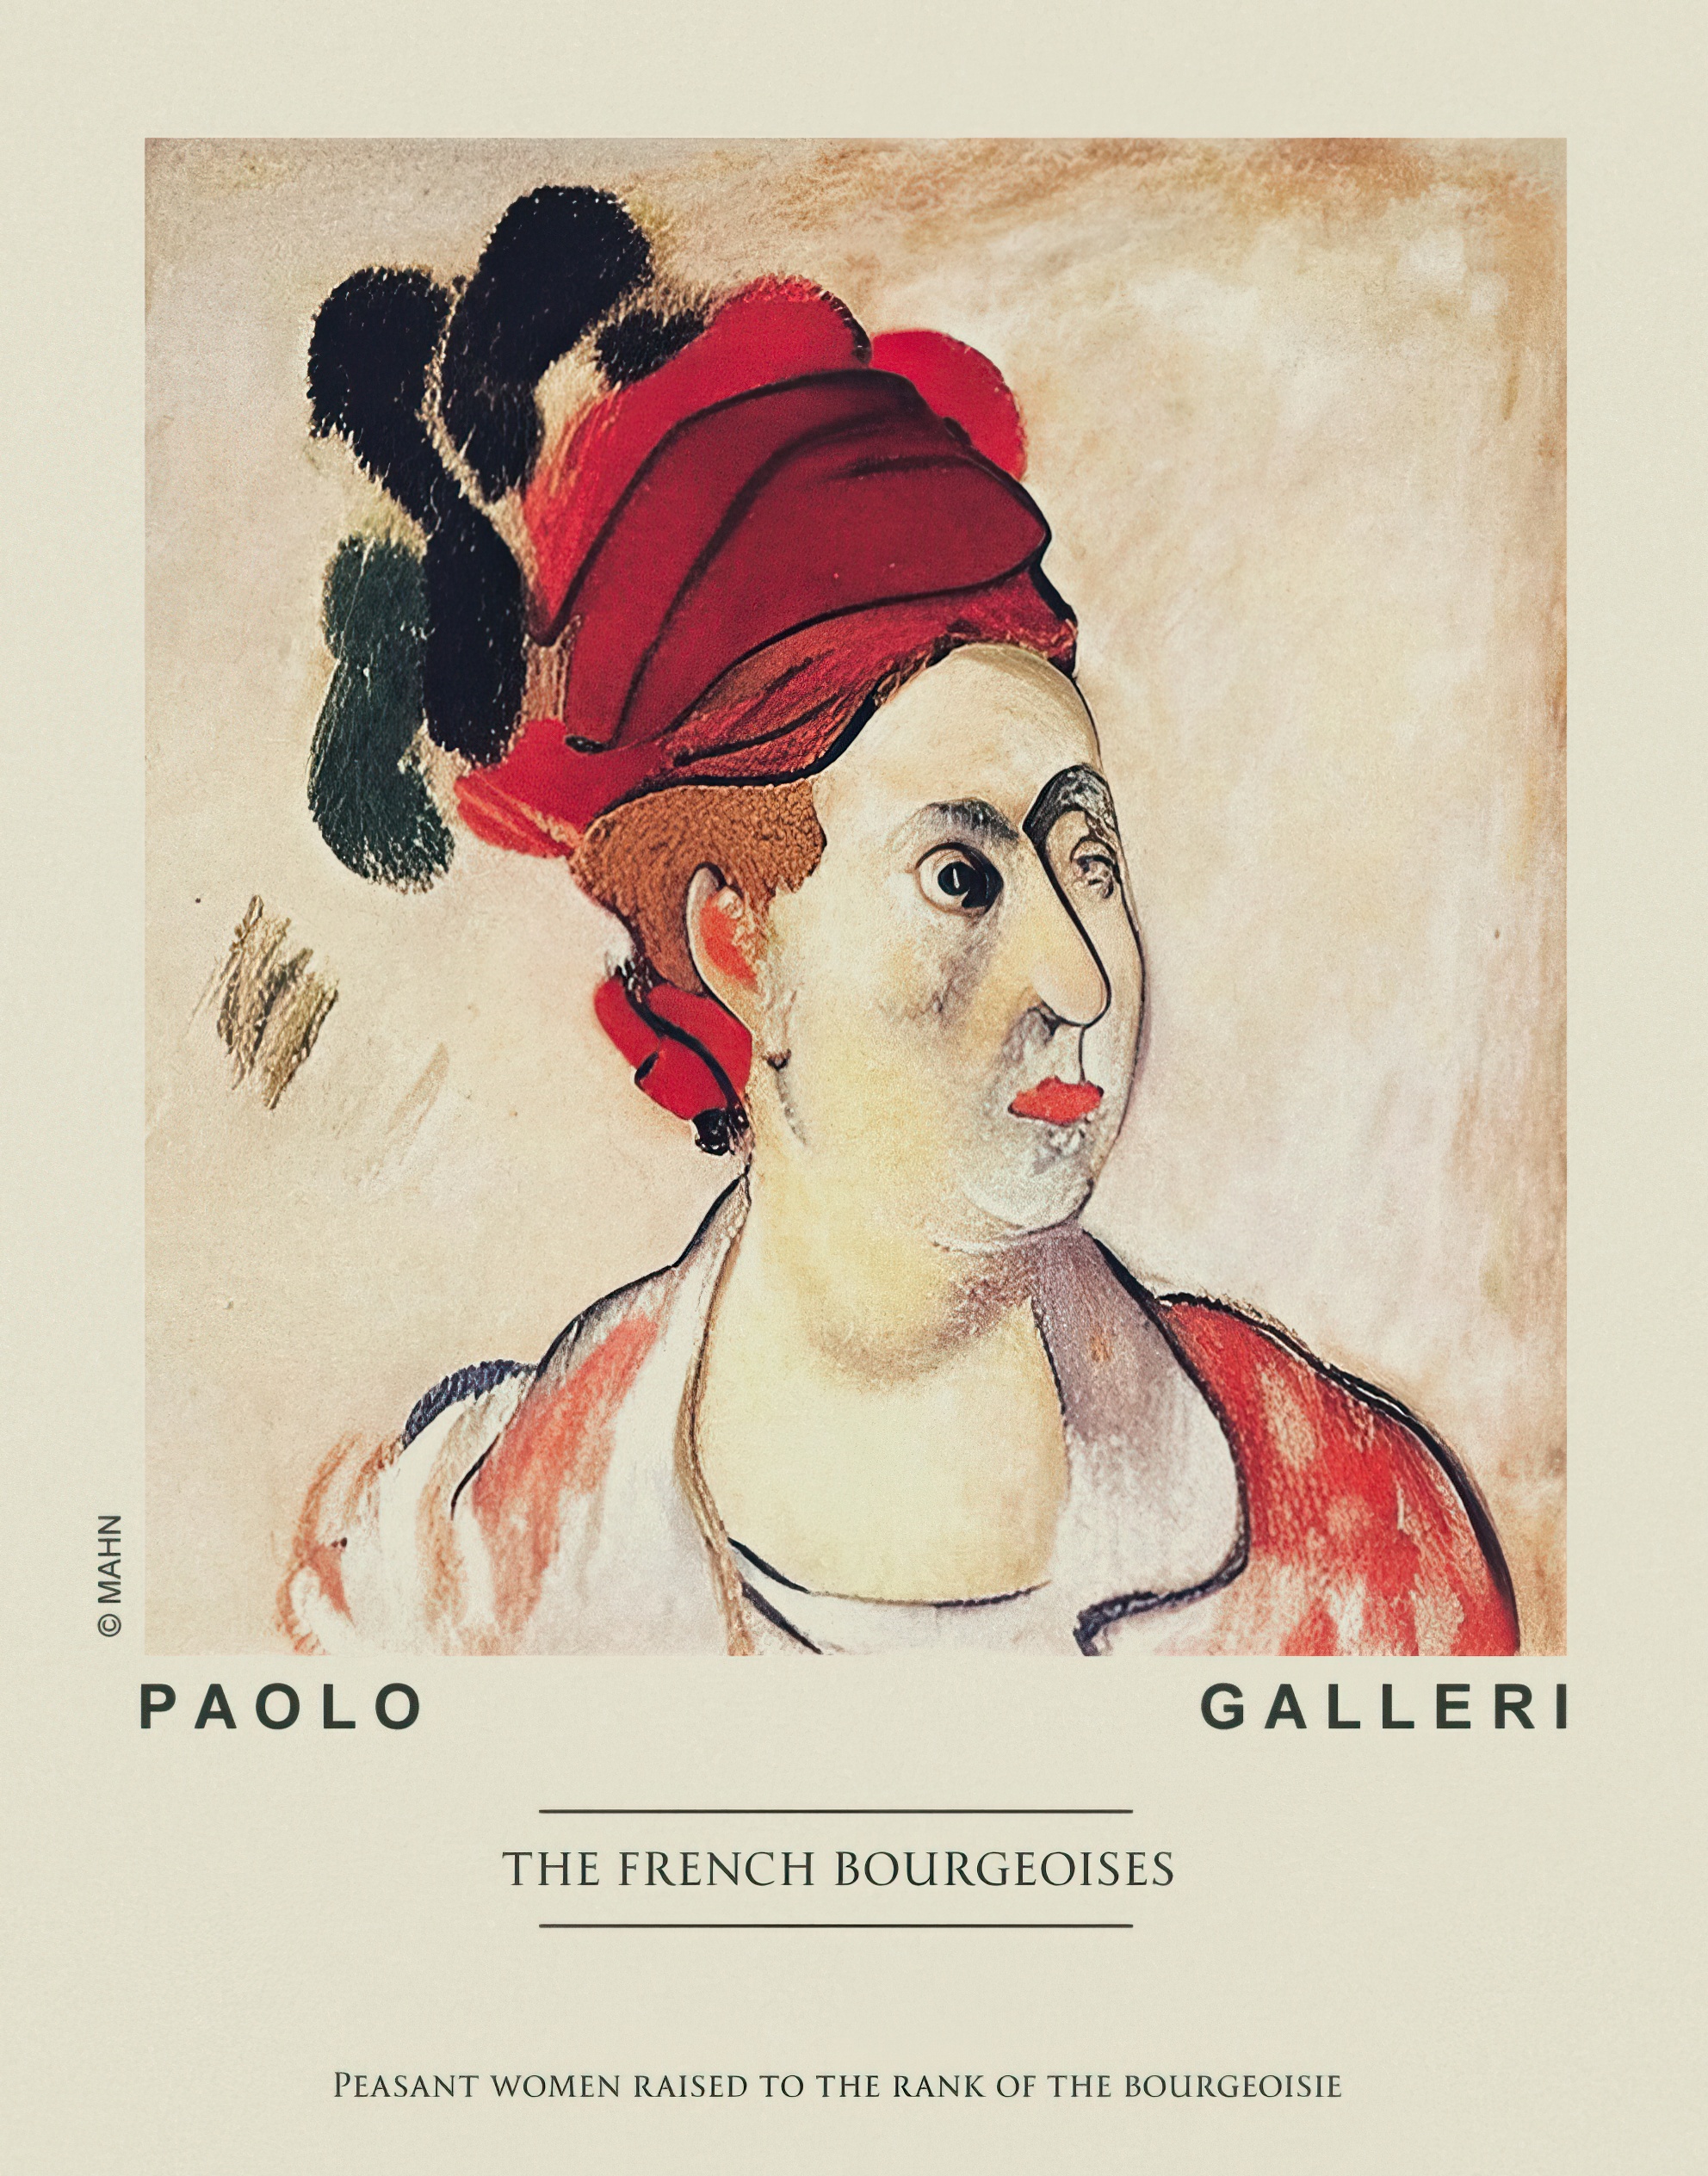 'The French Bourgeoises #1' |Paolo Galleri|